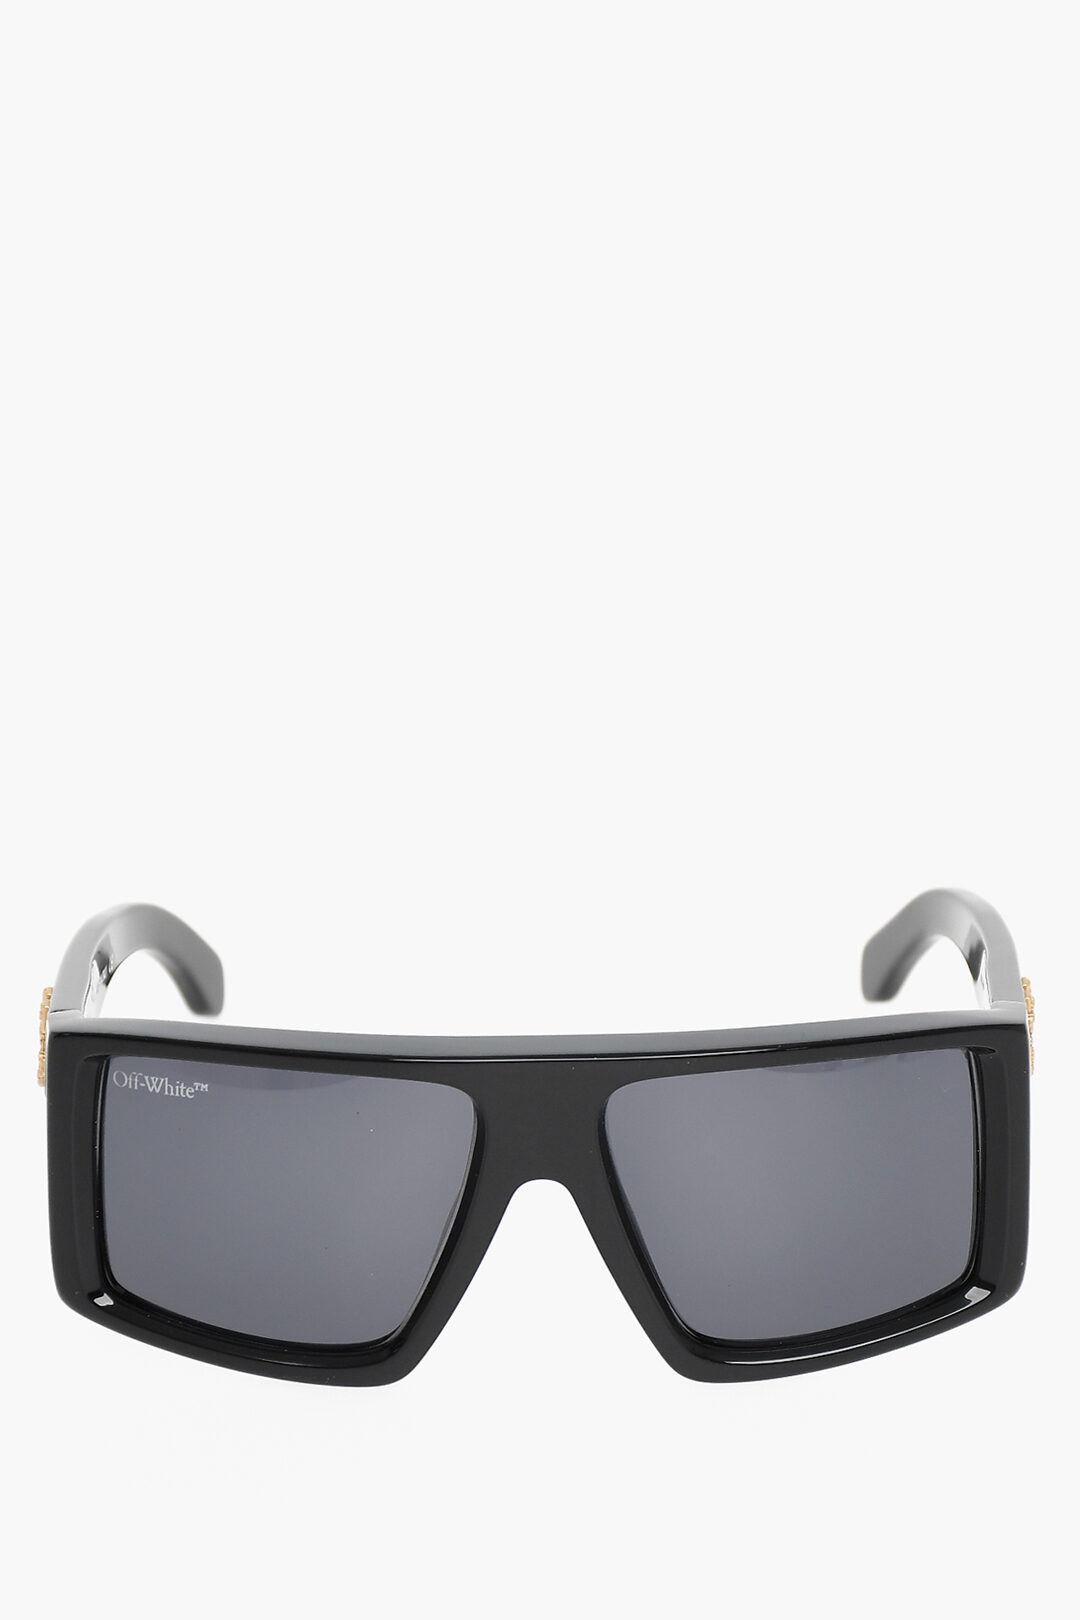 Off-White Sunglasses ALPS with Square Frame and Gold Effect Logo